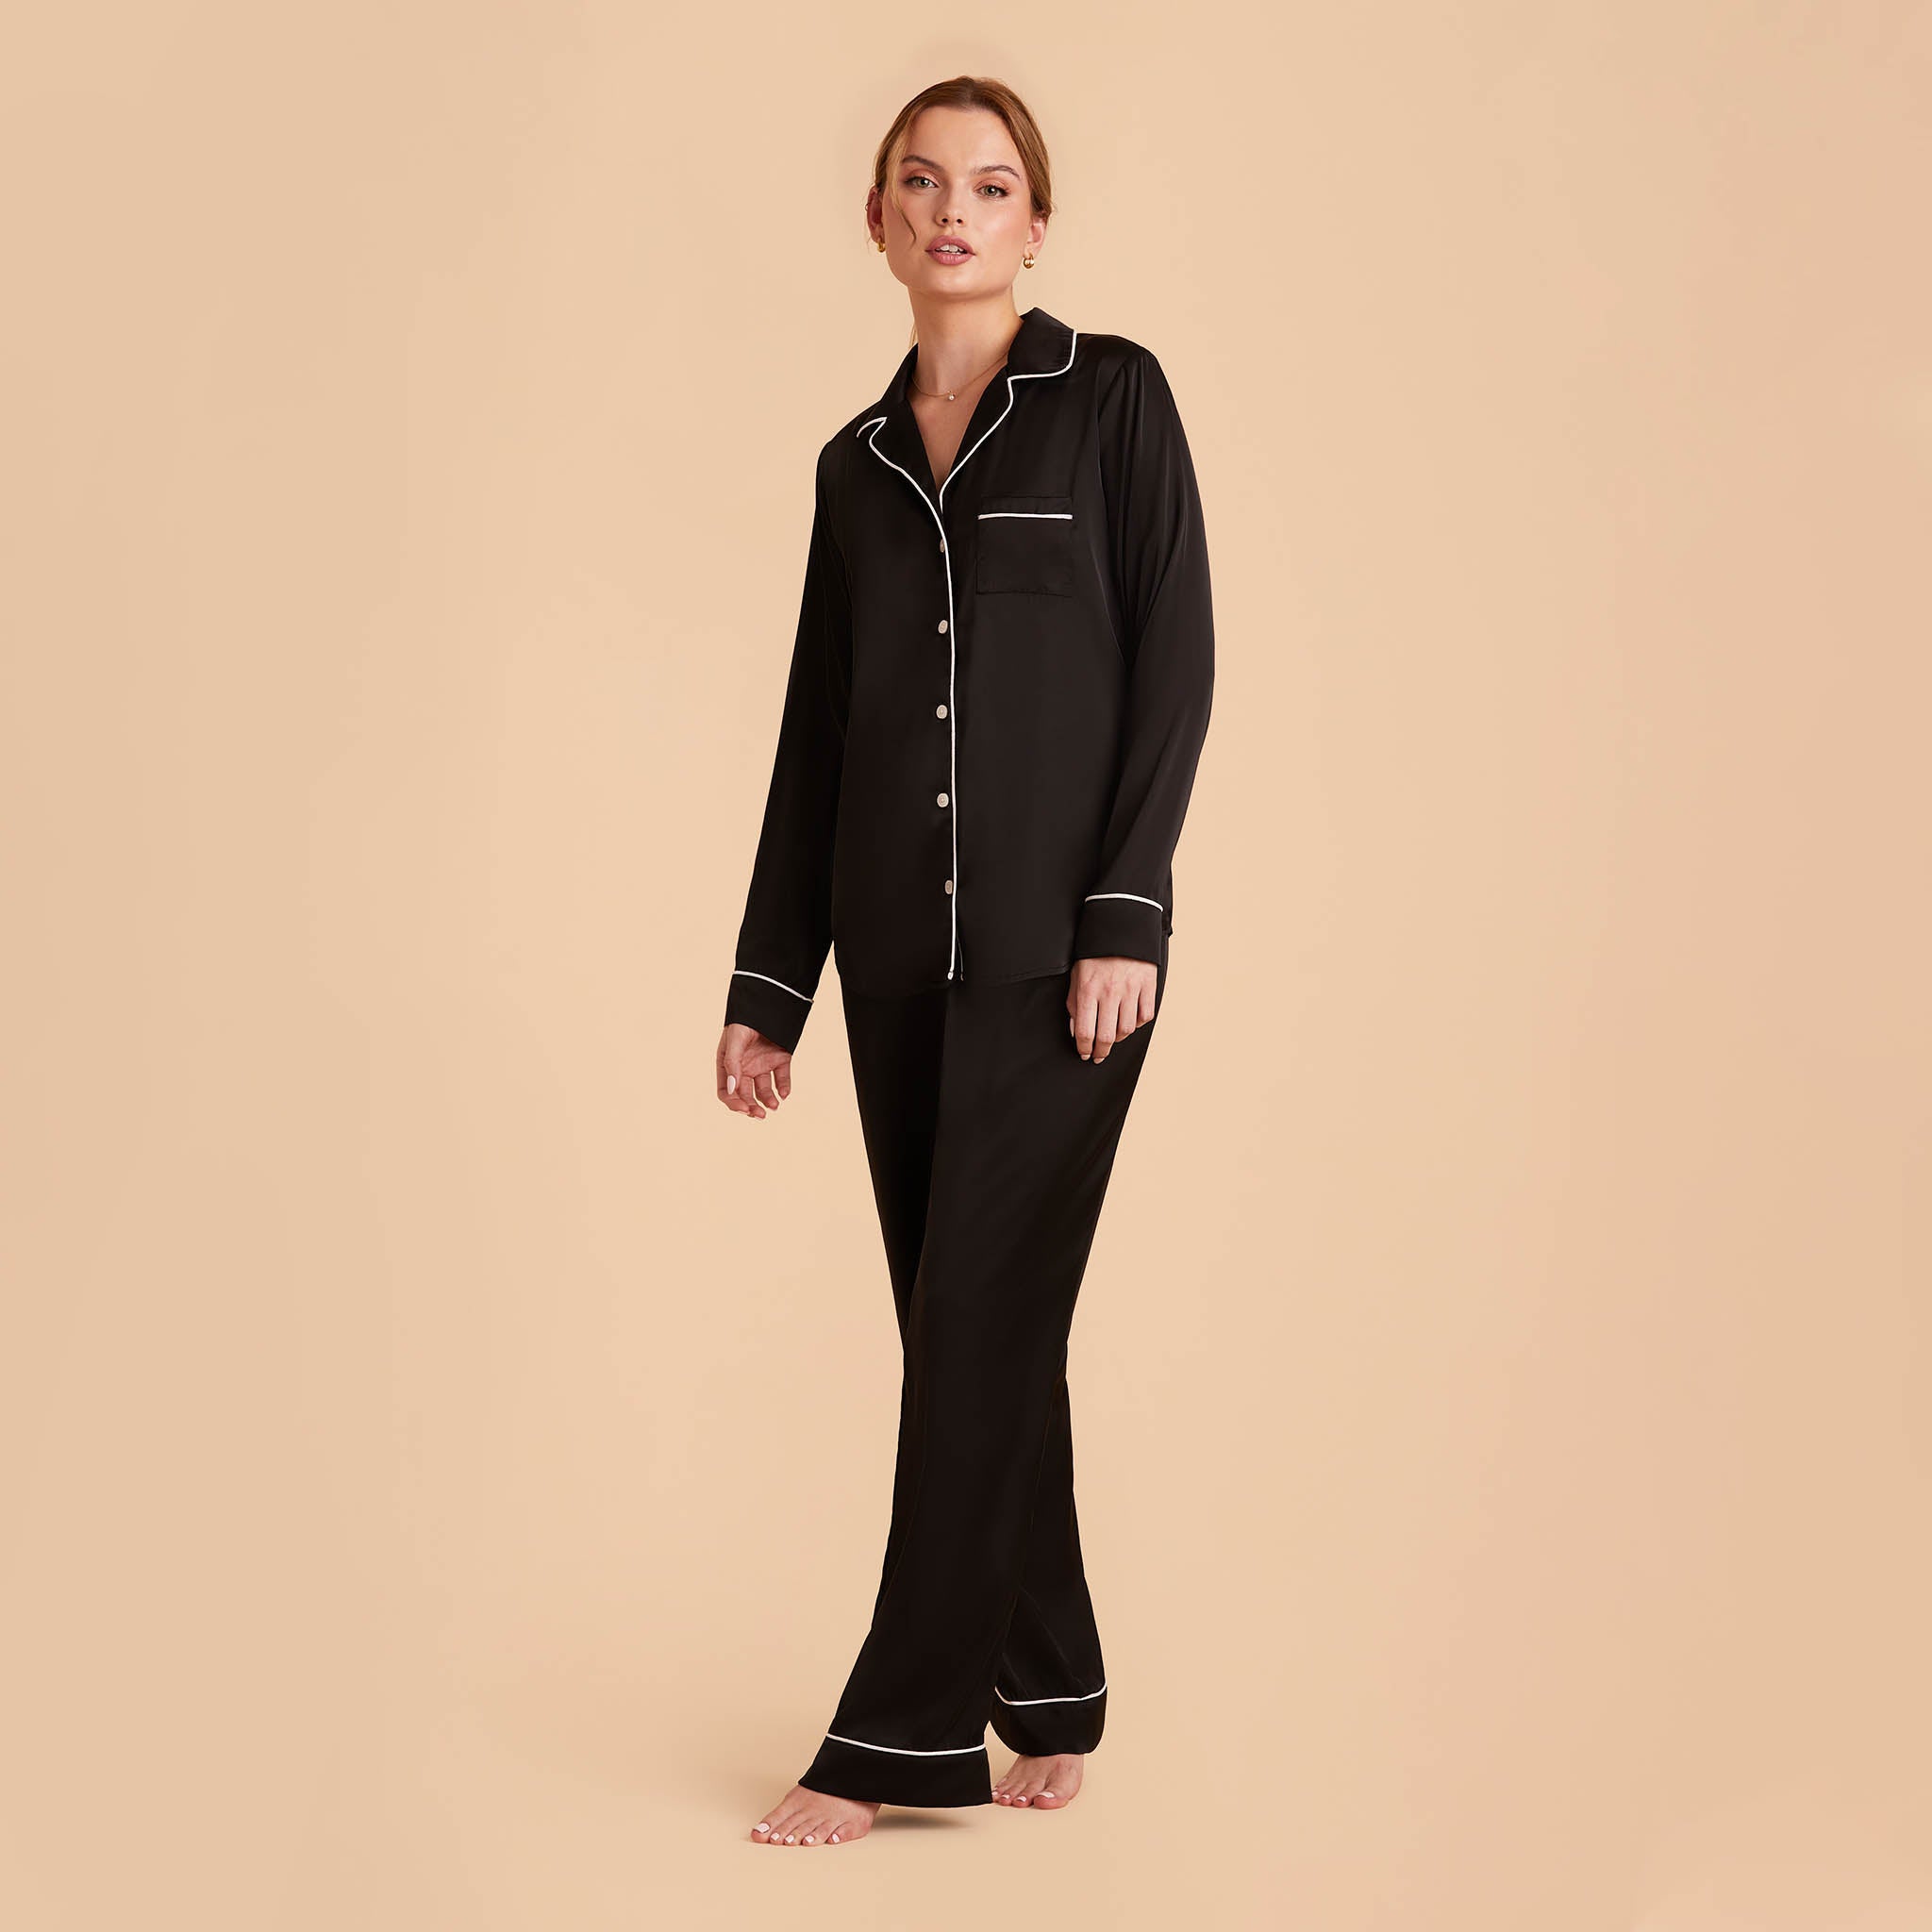 Jonny Satin Pants Bridesmaid Pajamas With White Piping in black, front view